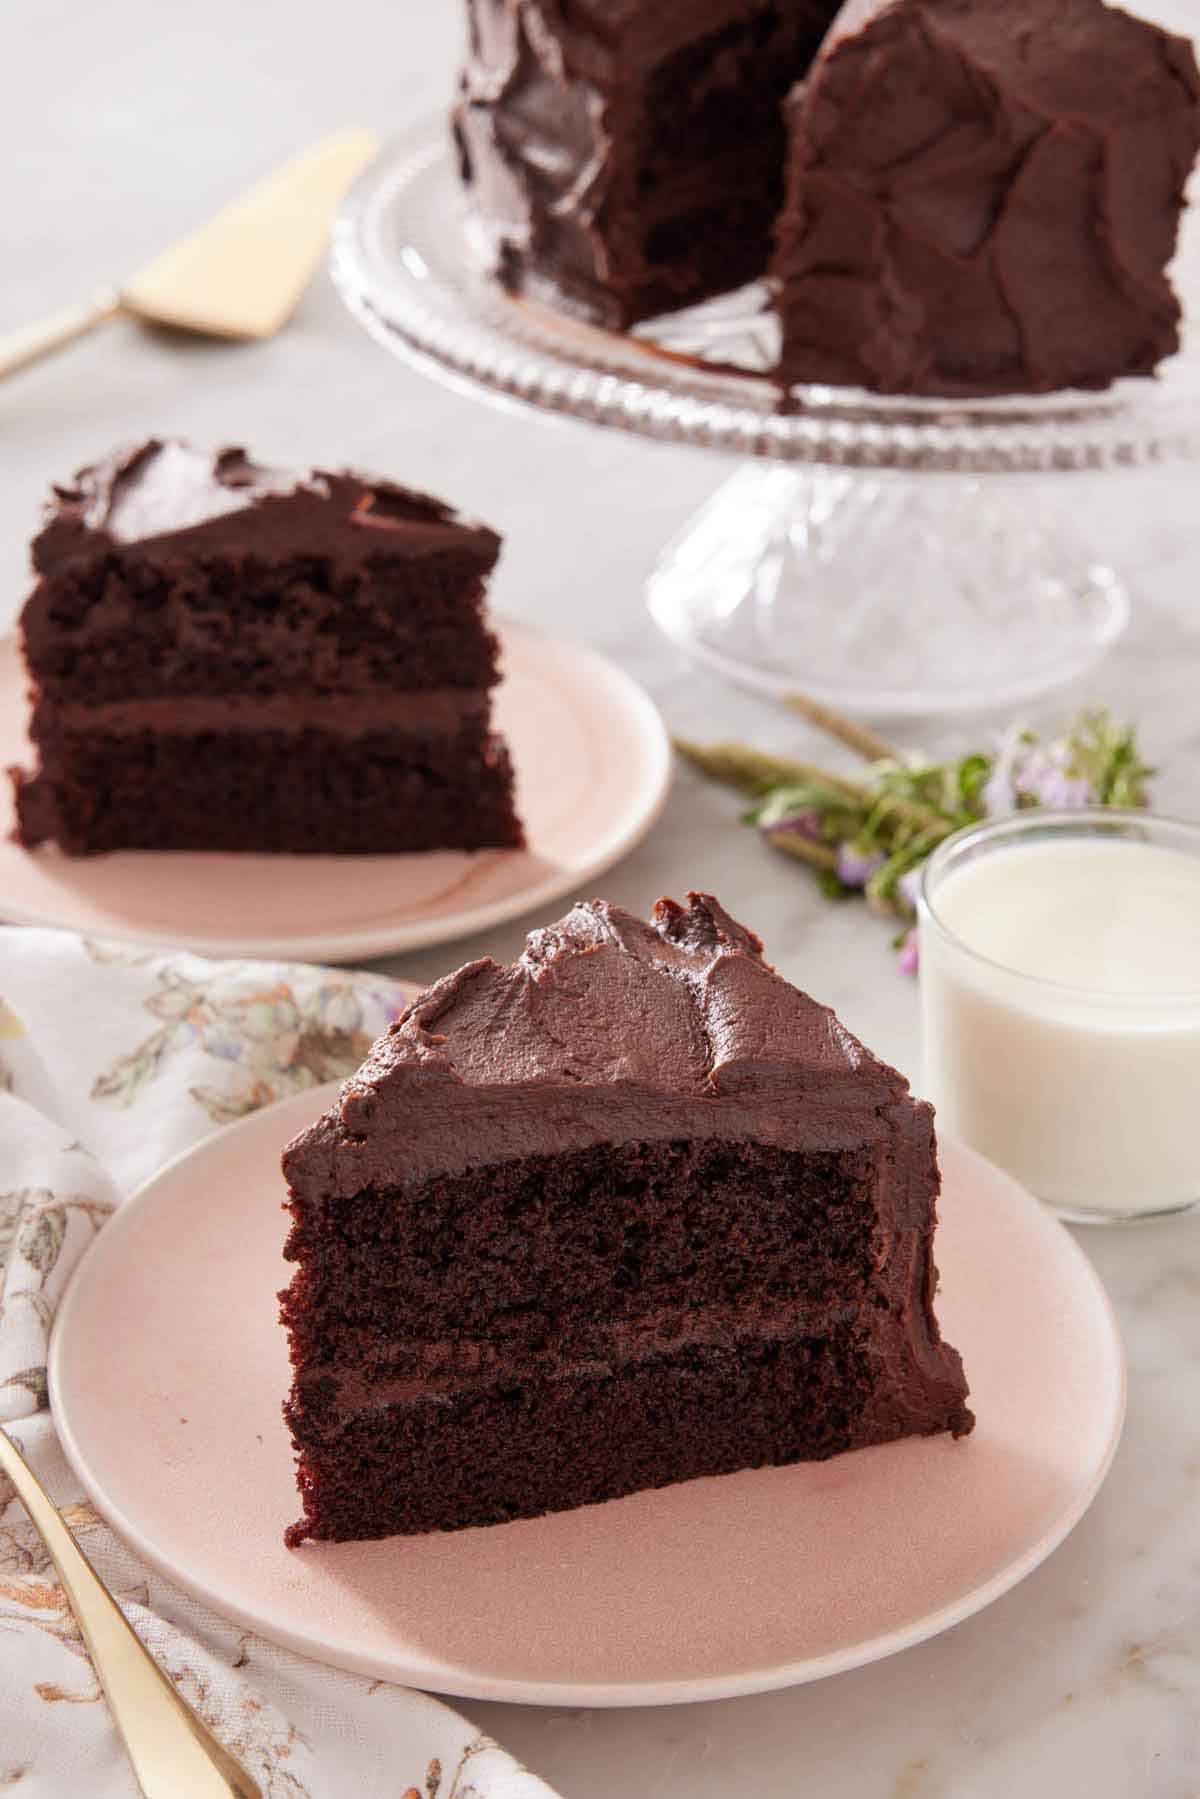 Two plates with sliced chocolate cake along with a glass of milk and cake stand with more cake.